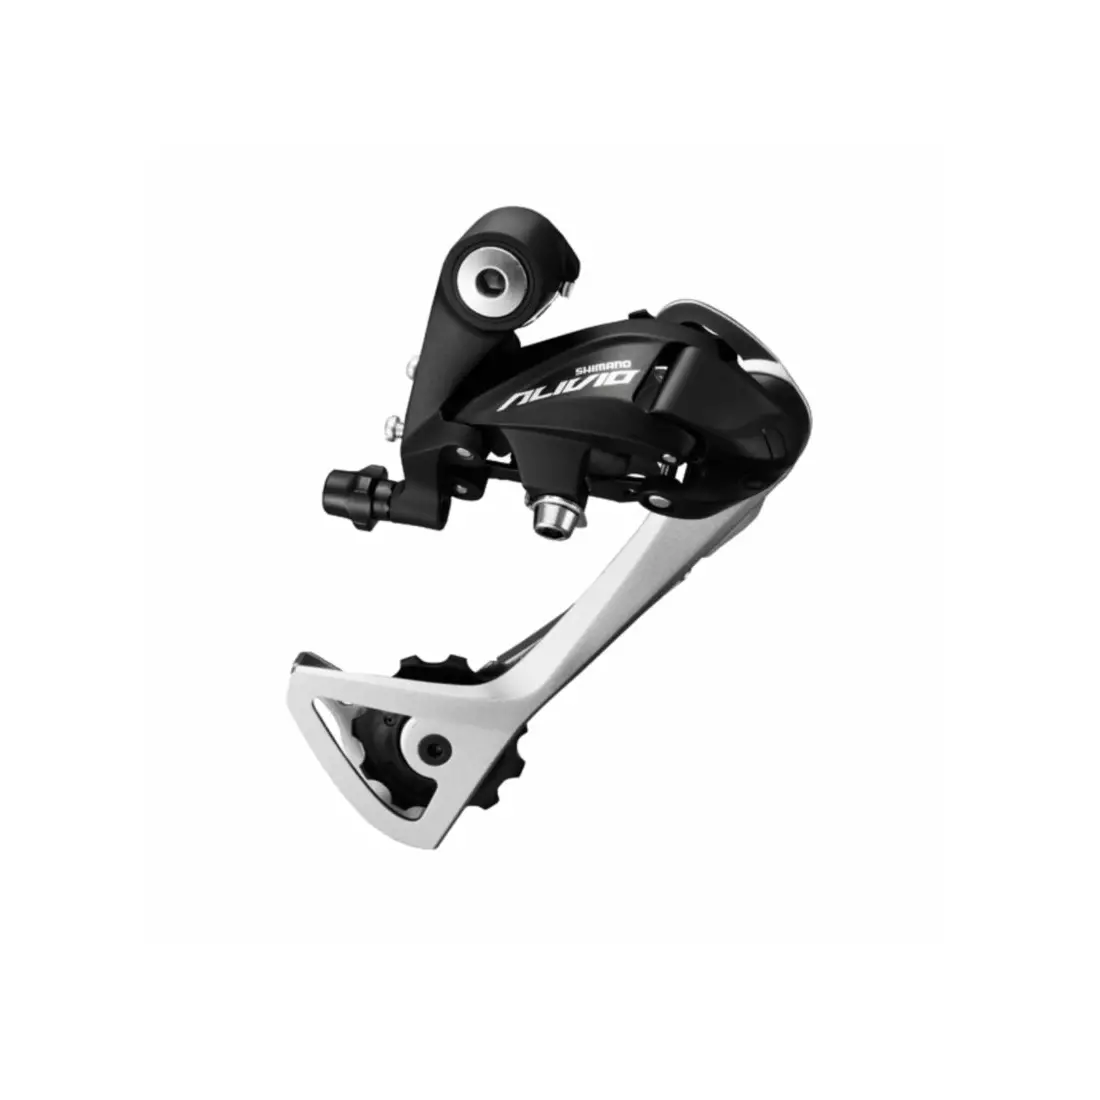 SHIMANO RD-T4000 bicycle rear derailleur 9-speed, black and silver